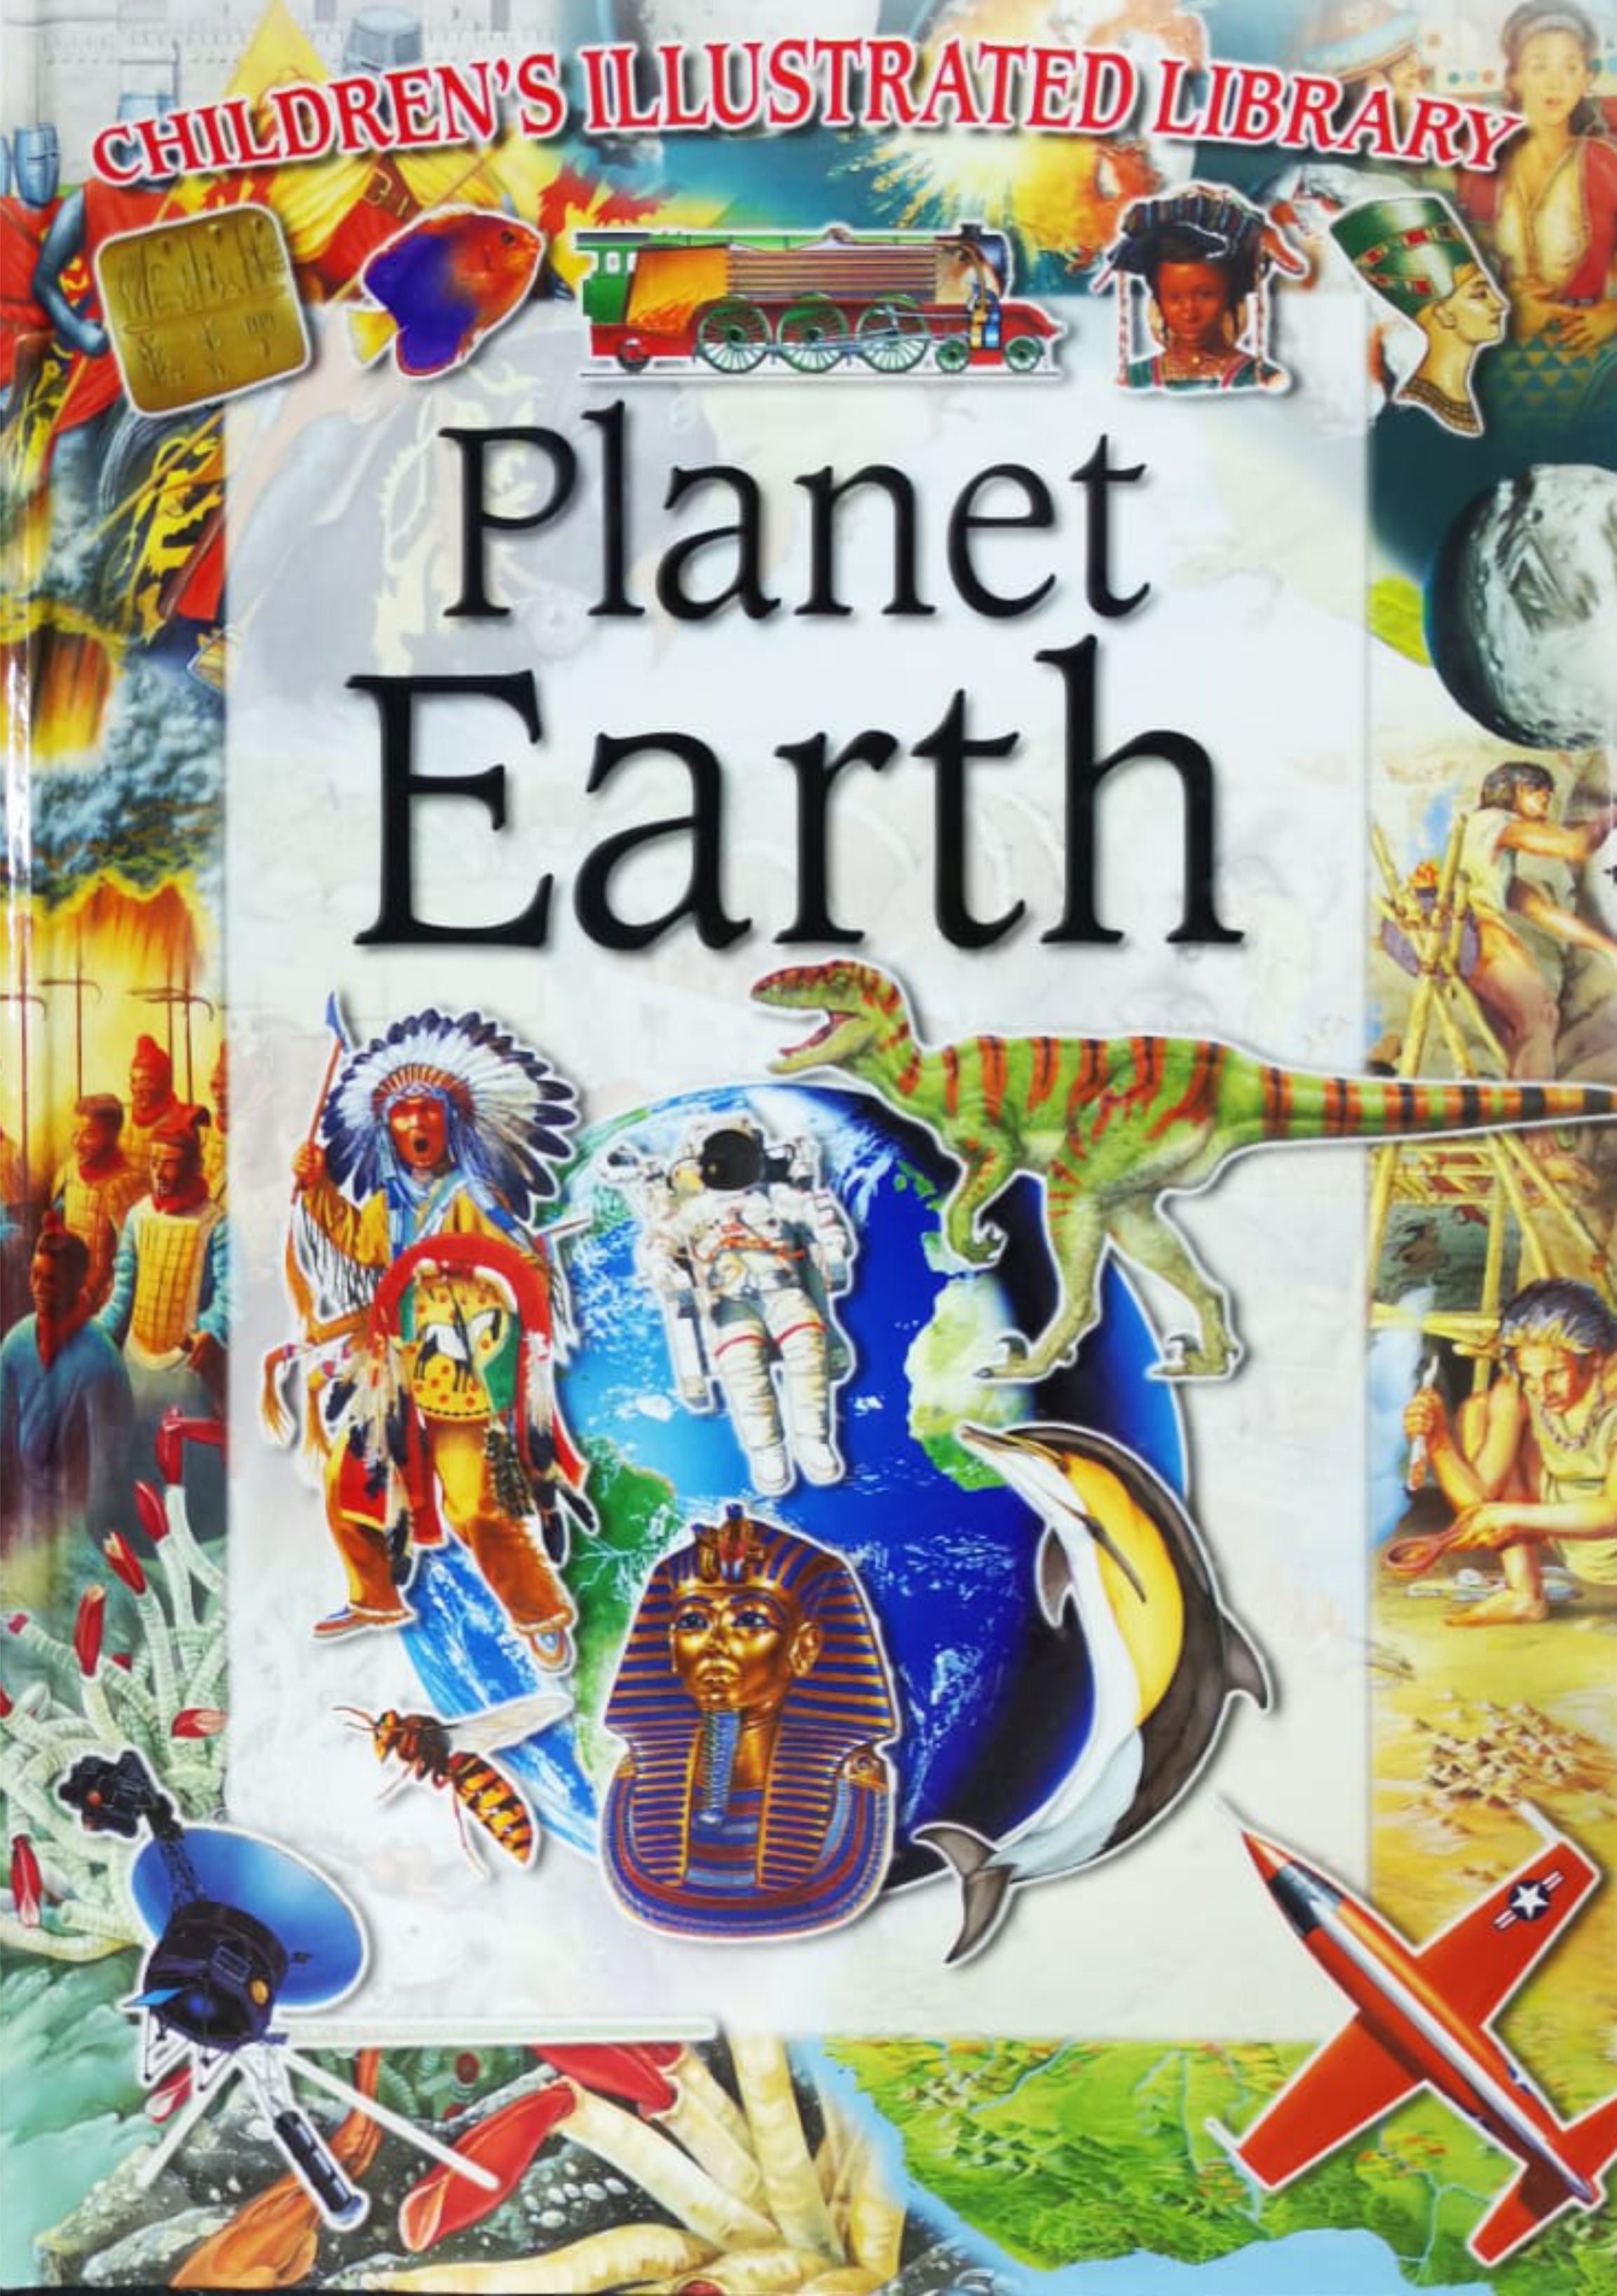 Planet Earth (Children's Illustrated Library)